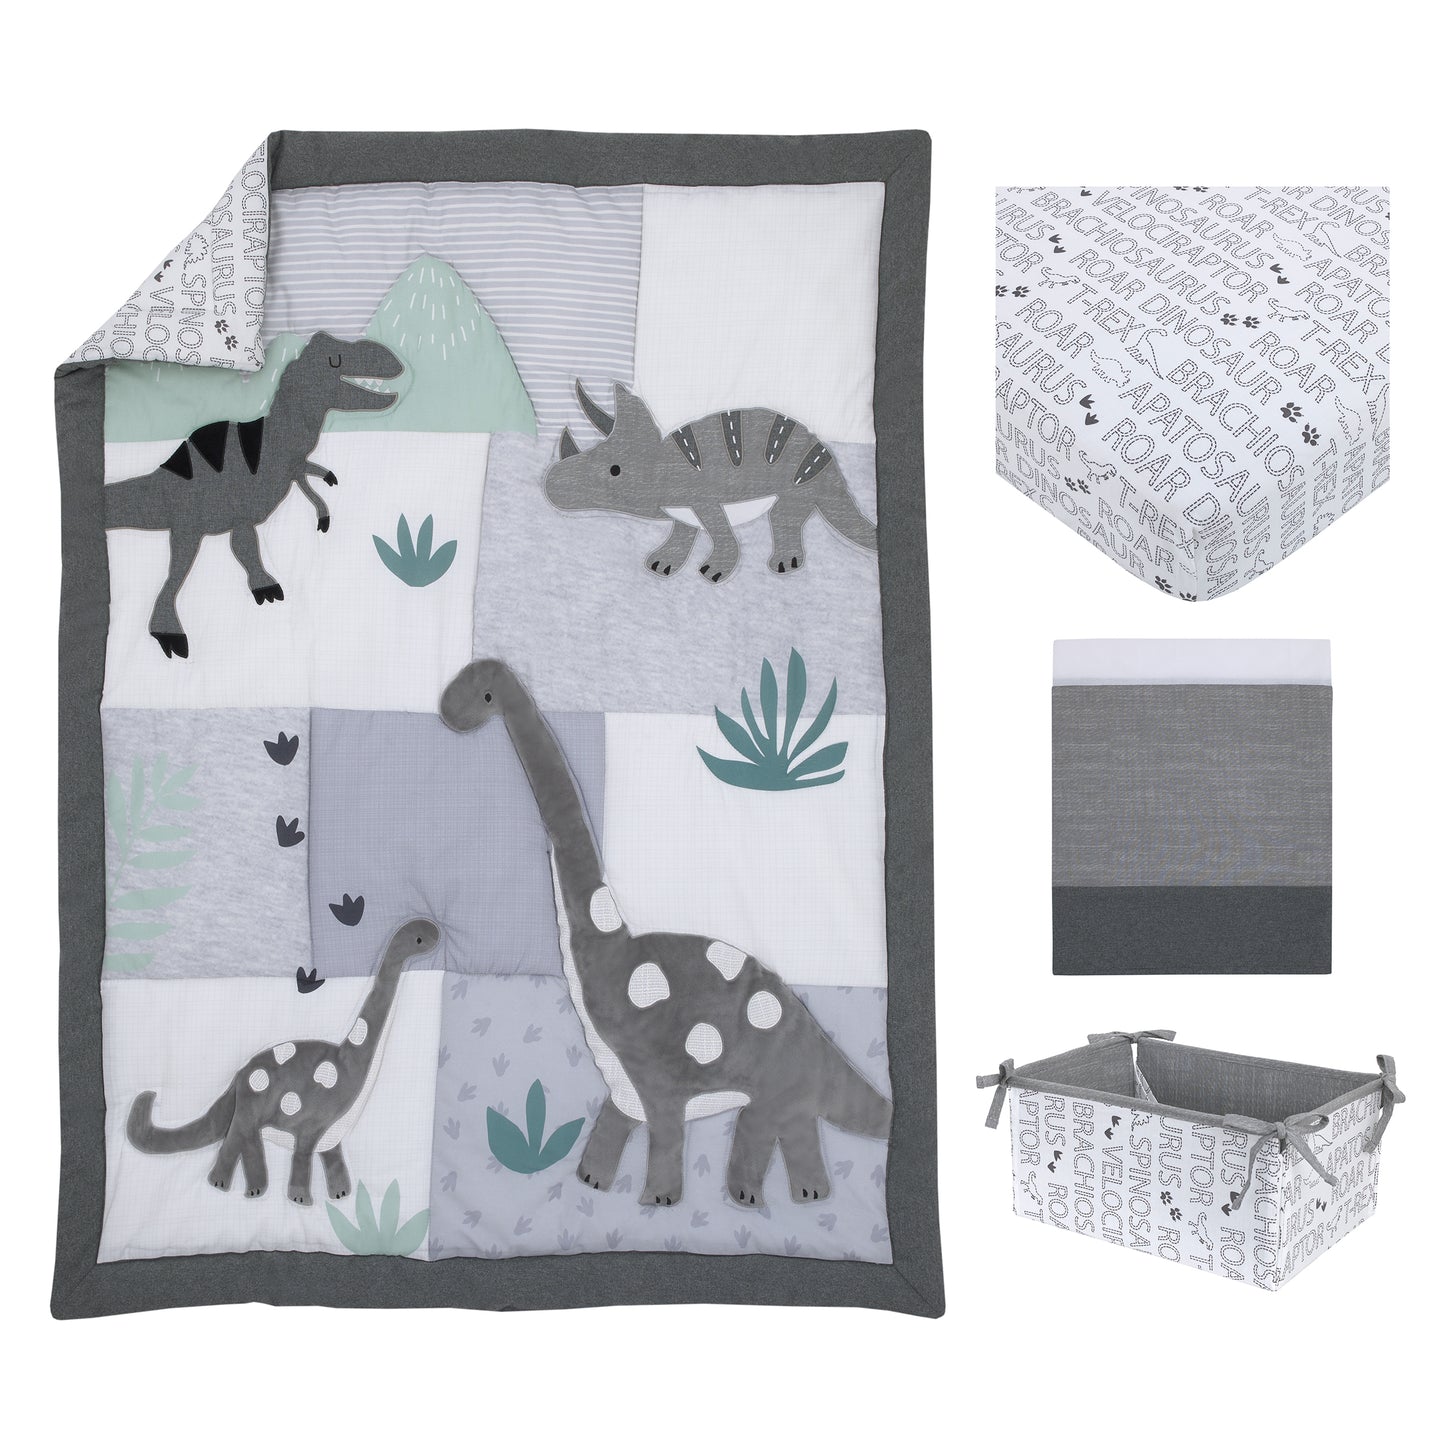 NoJo Baby-Saurus Gray, White, and Green Triceratops,  Brontosaurus, and Tyrannosaurus Dinosaurs with Mountains and Leaves 4 Piece Nursery Crib Bedding Set - Comforter, 100% Cotton Fitted Crib Sheet, Crib Skirt, and Storage